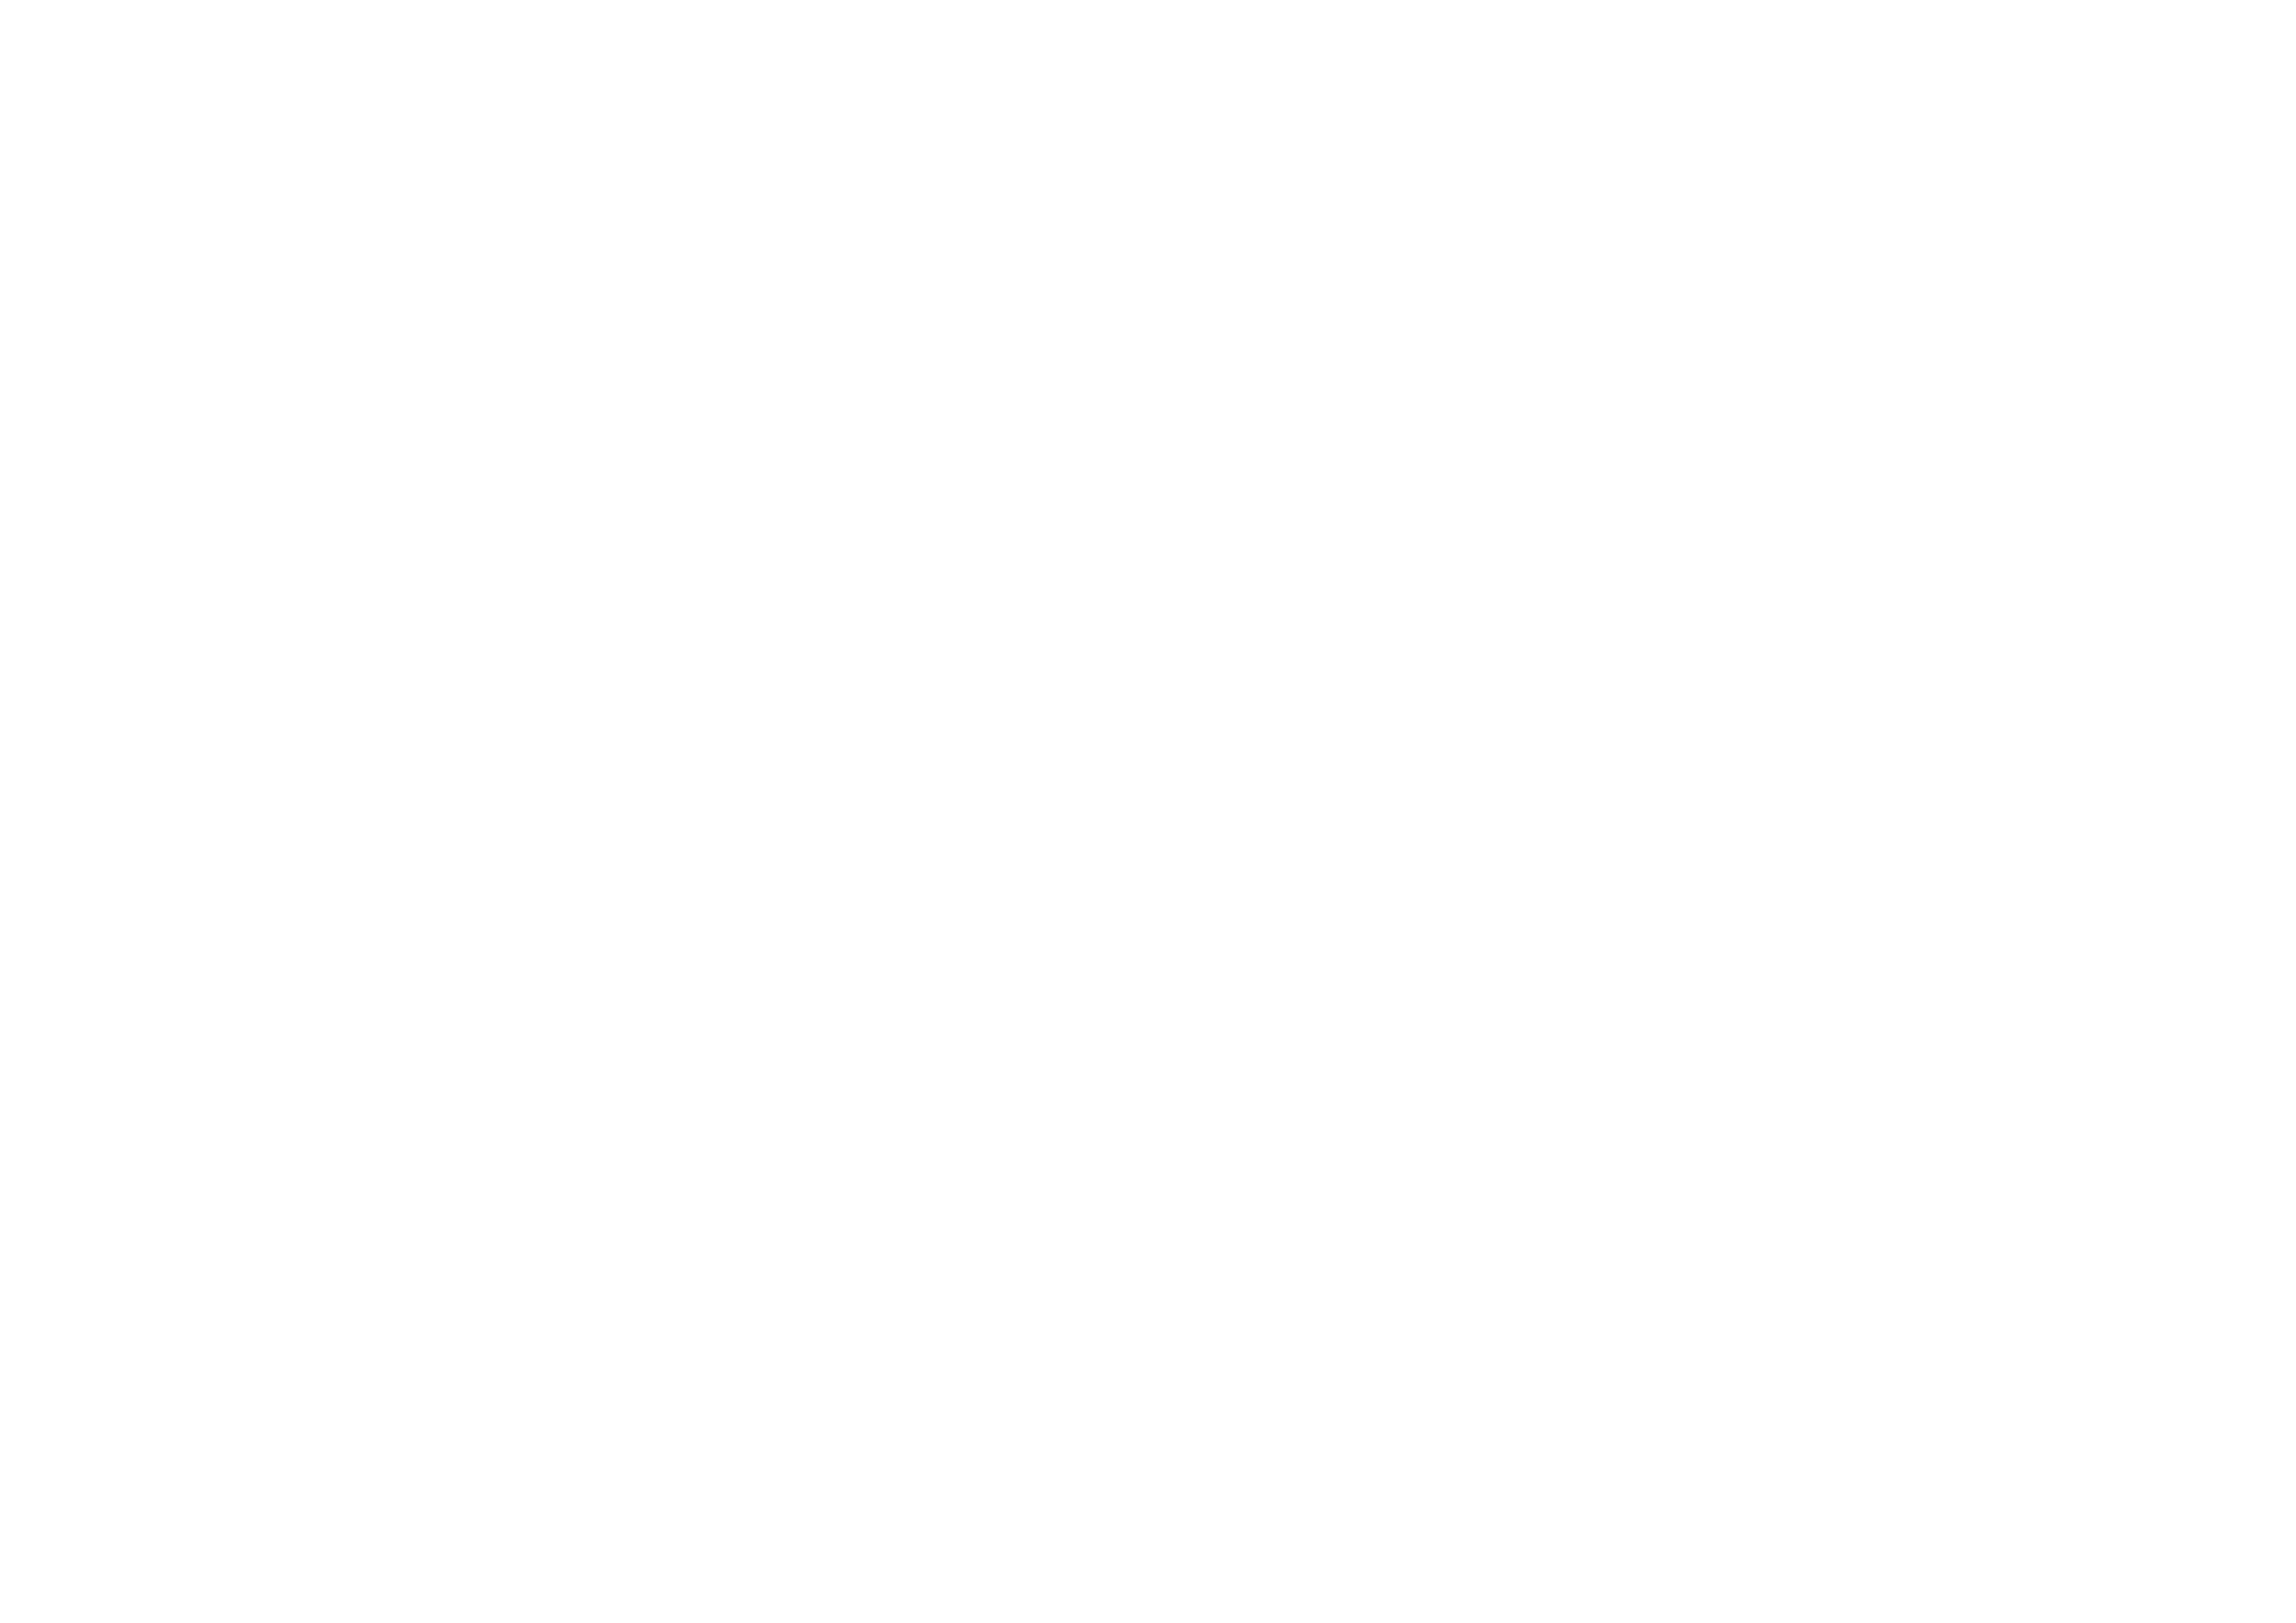 COMMITTED FOR EVER